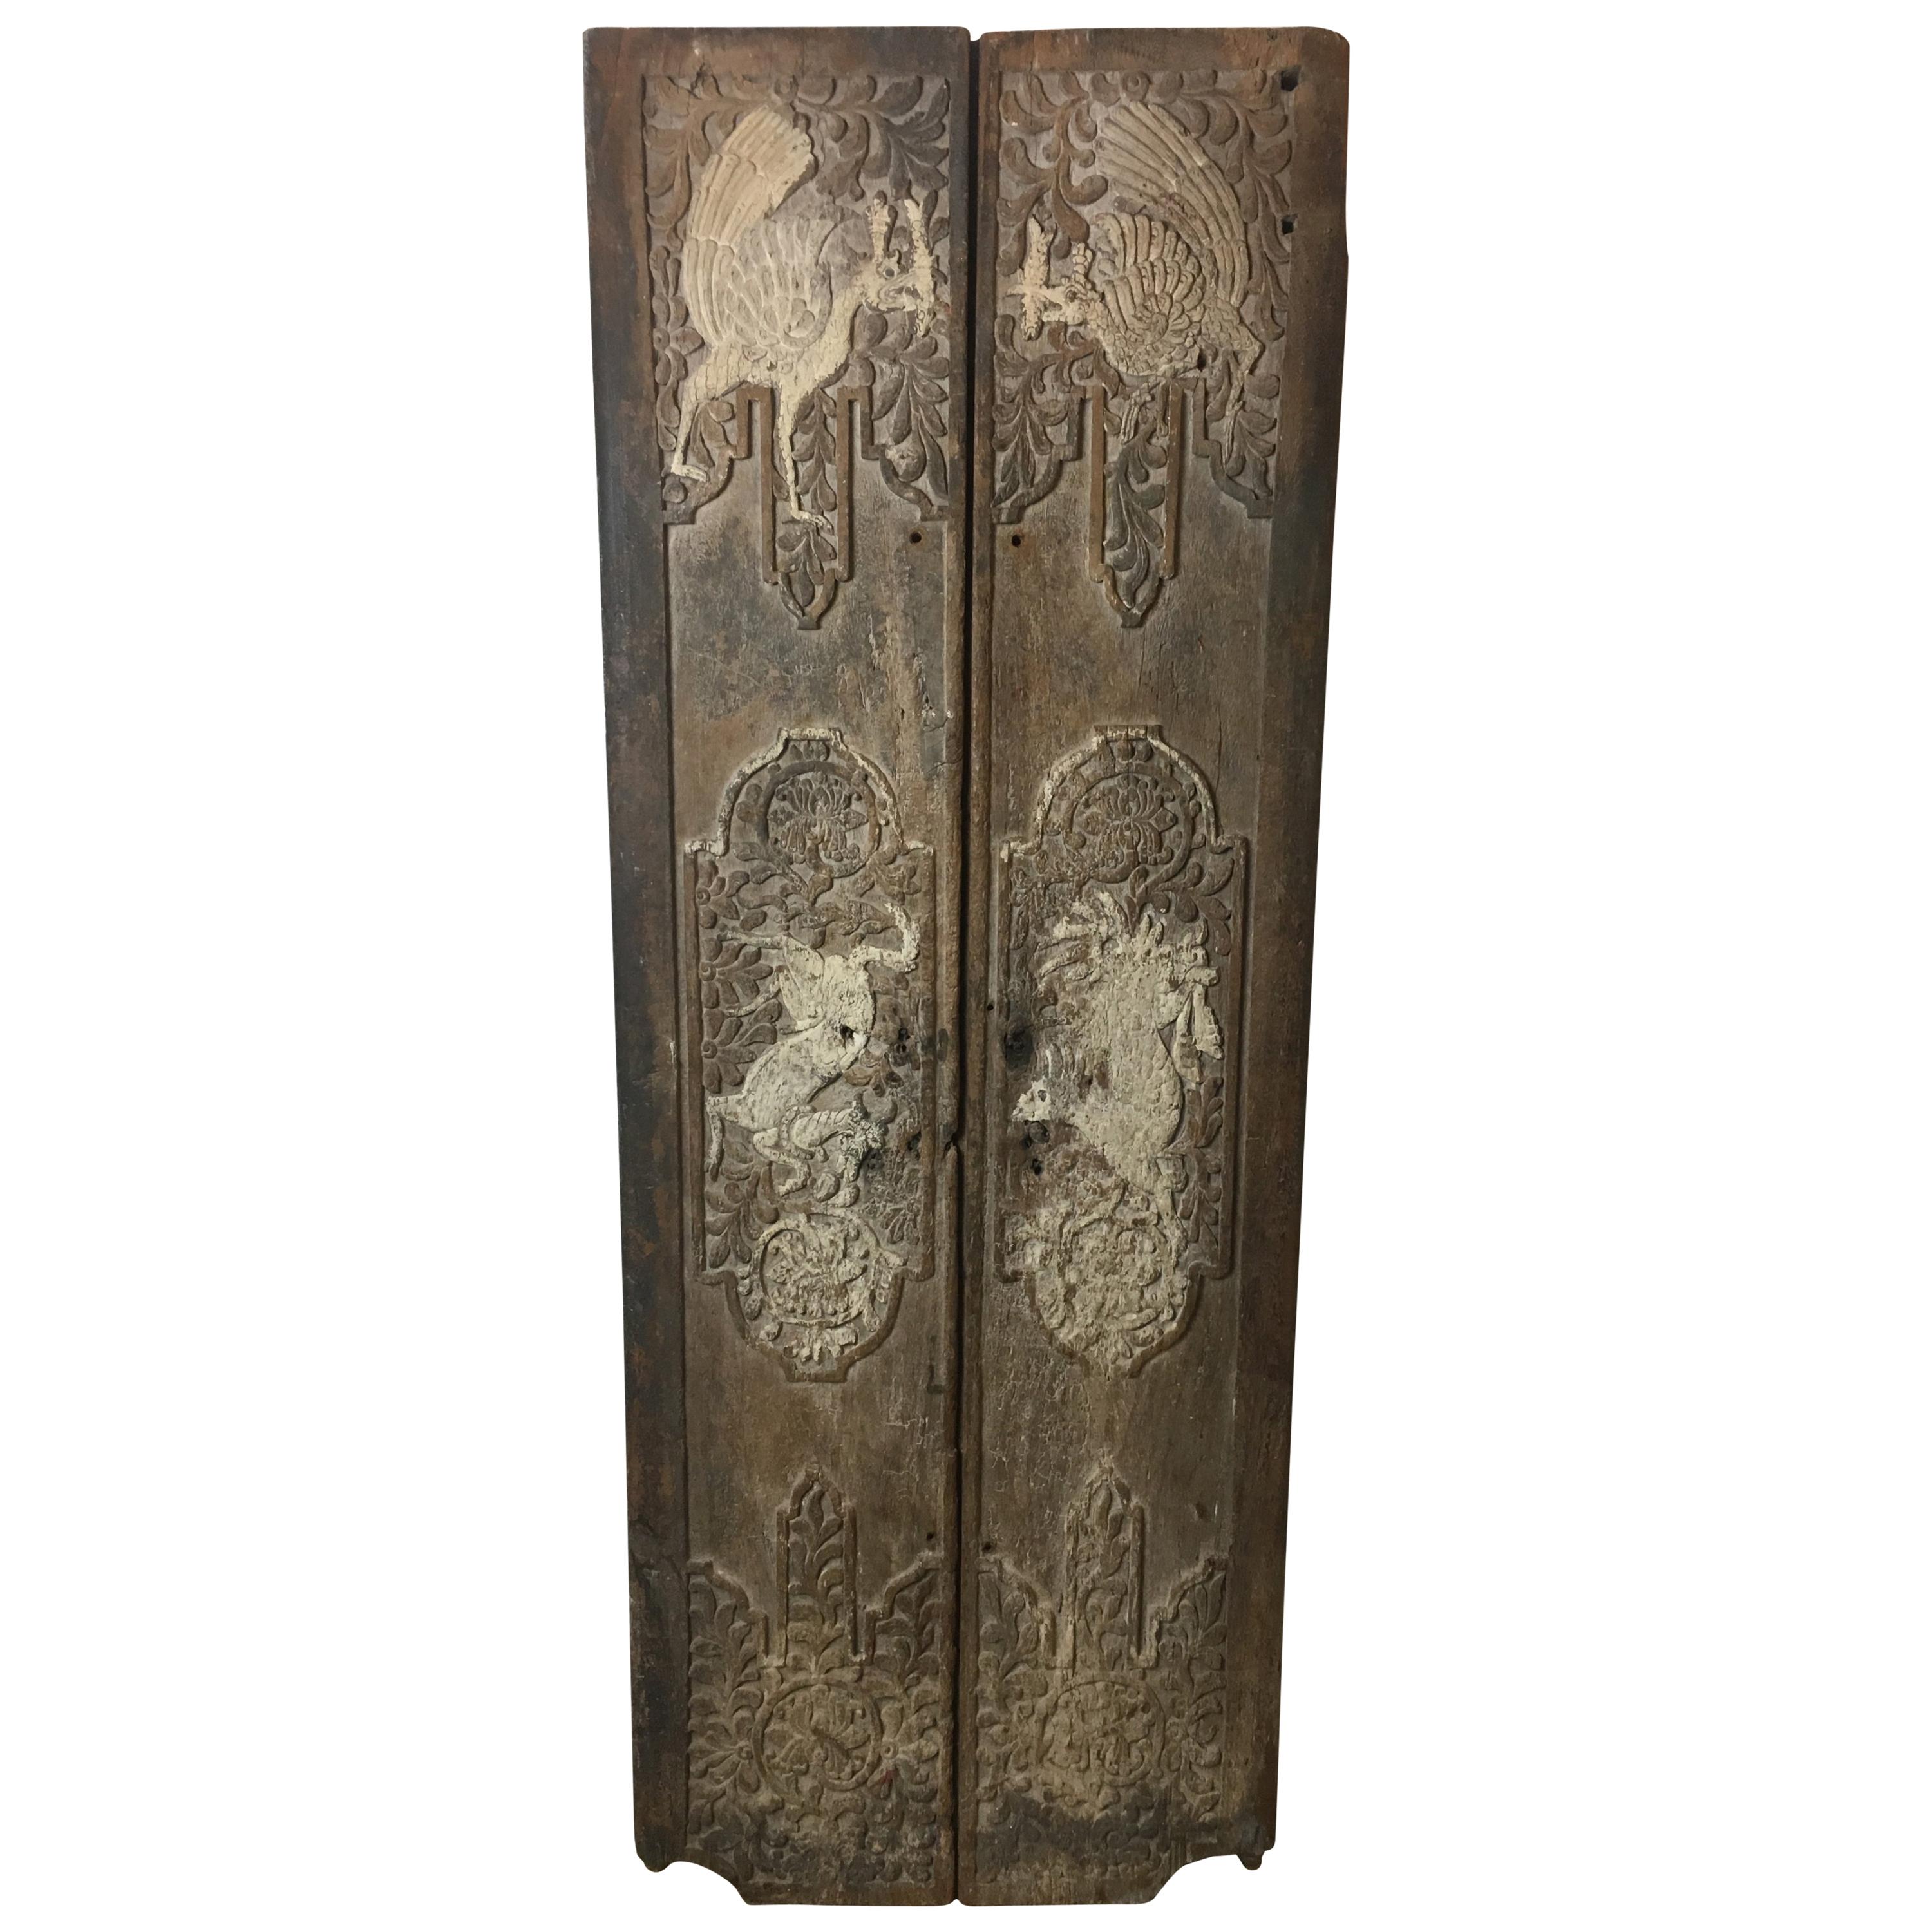 Pair of 17th Century Chinese Hand-Carved Doors or Decorative Wall Panels